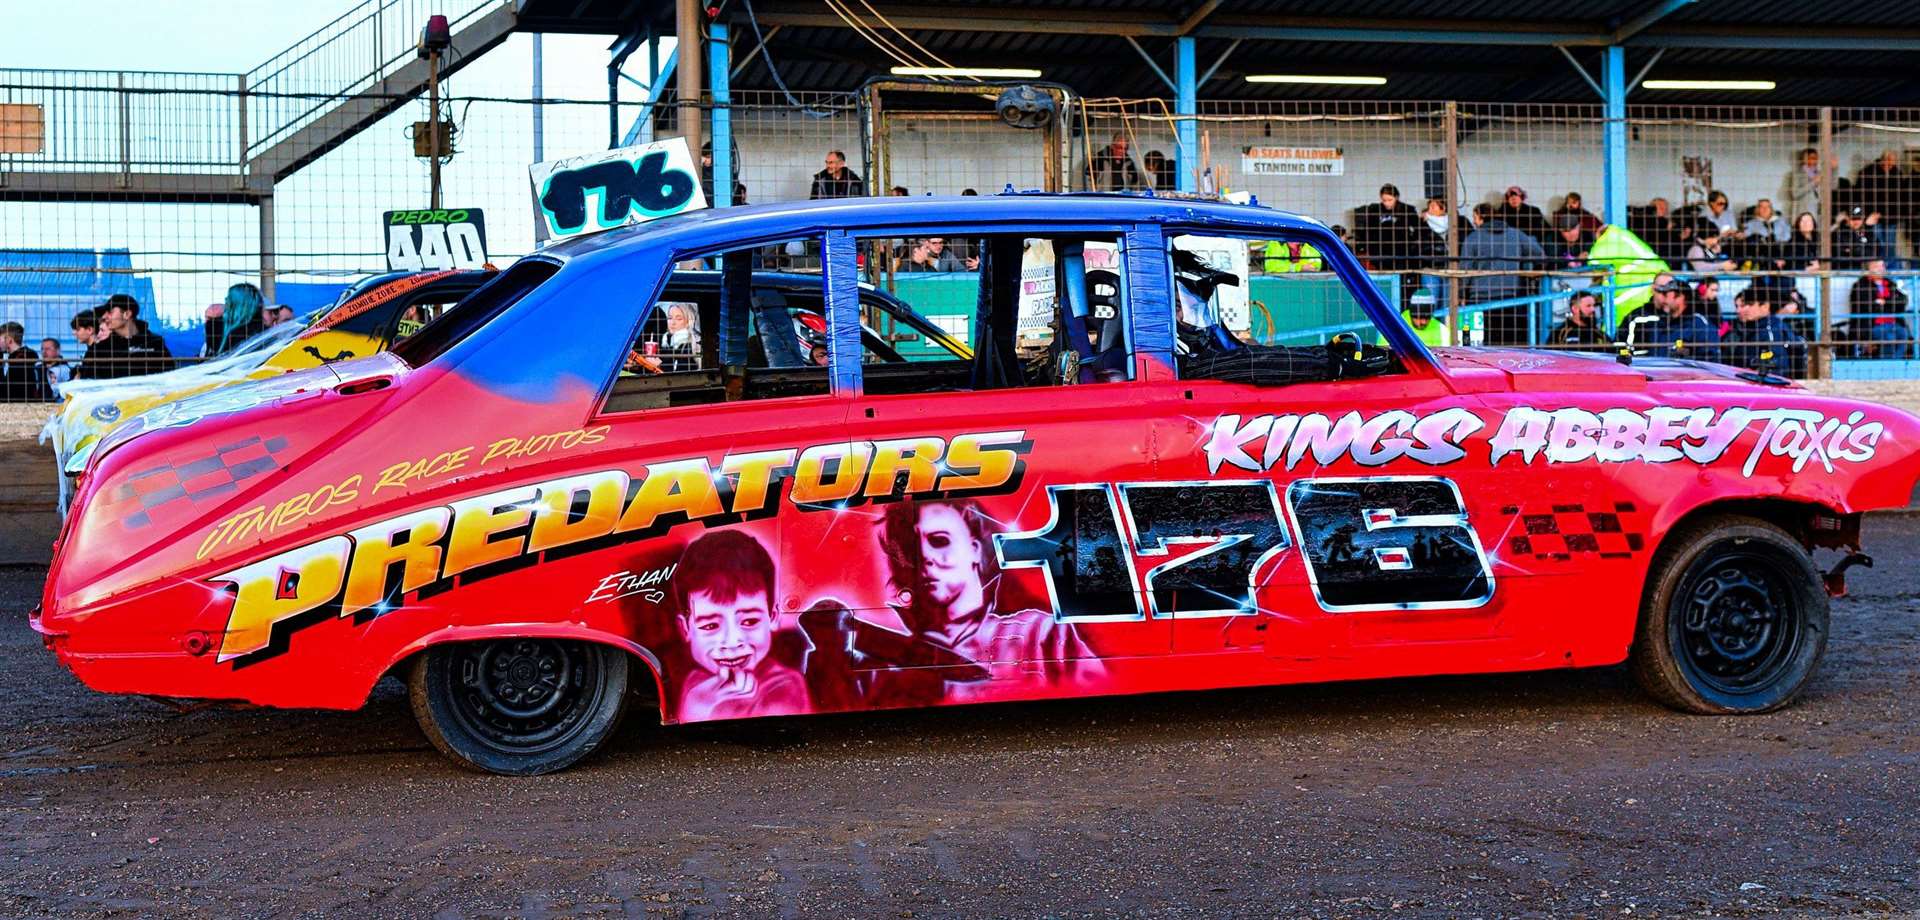 Ady Gibbs had the car of the meeting with this fantastic DS Limo. Picture: Jim Harrod